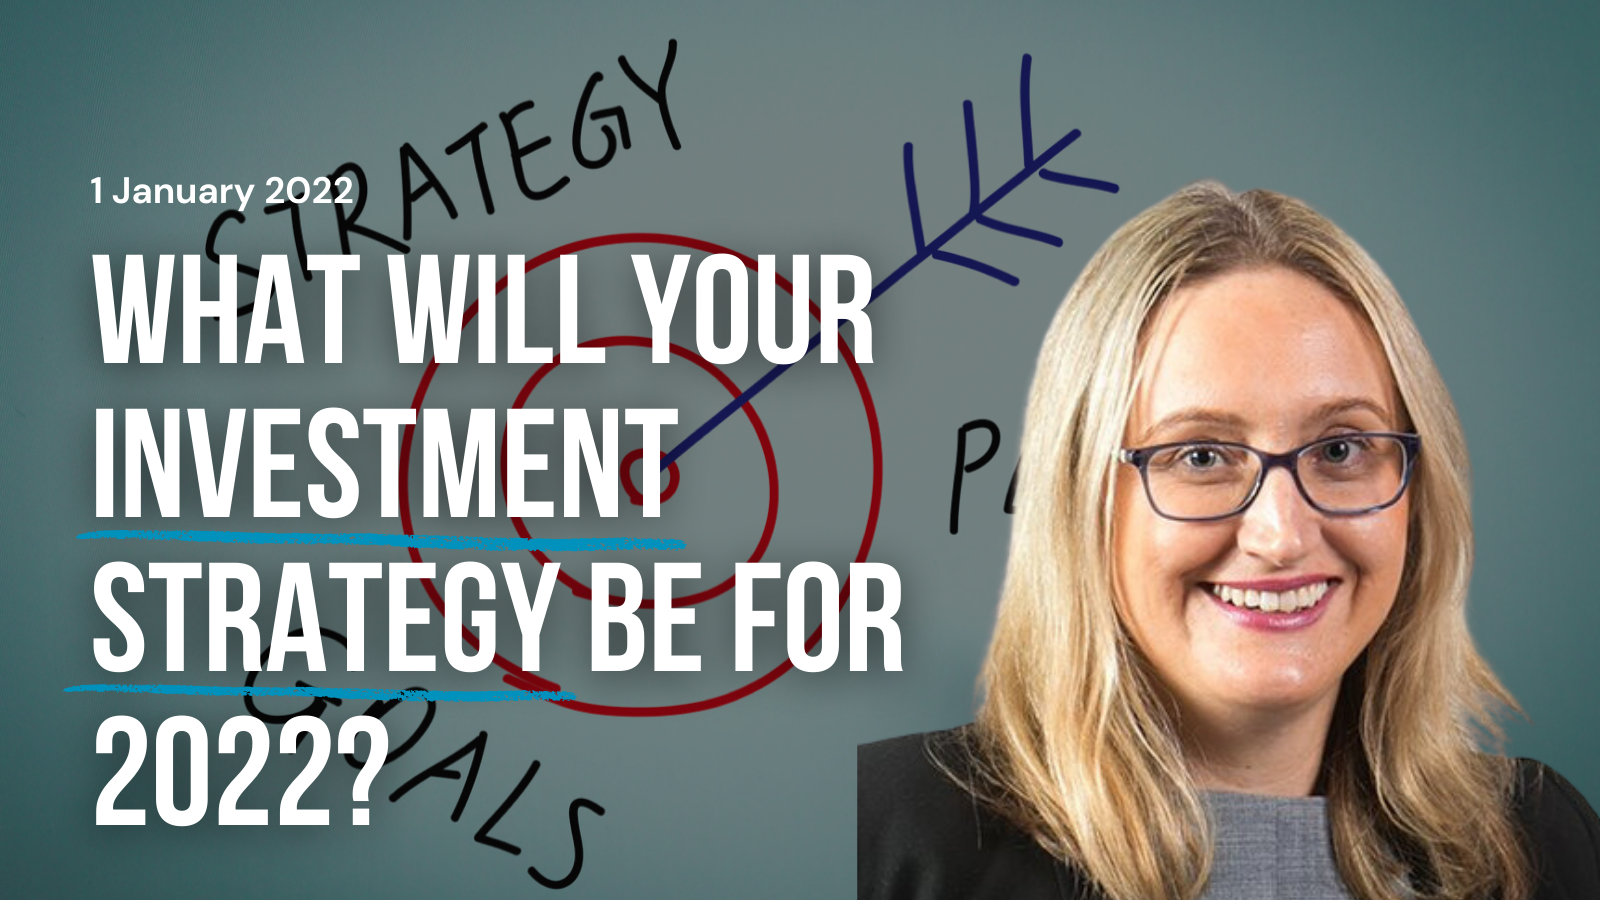 83. your investment strategy for 2022